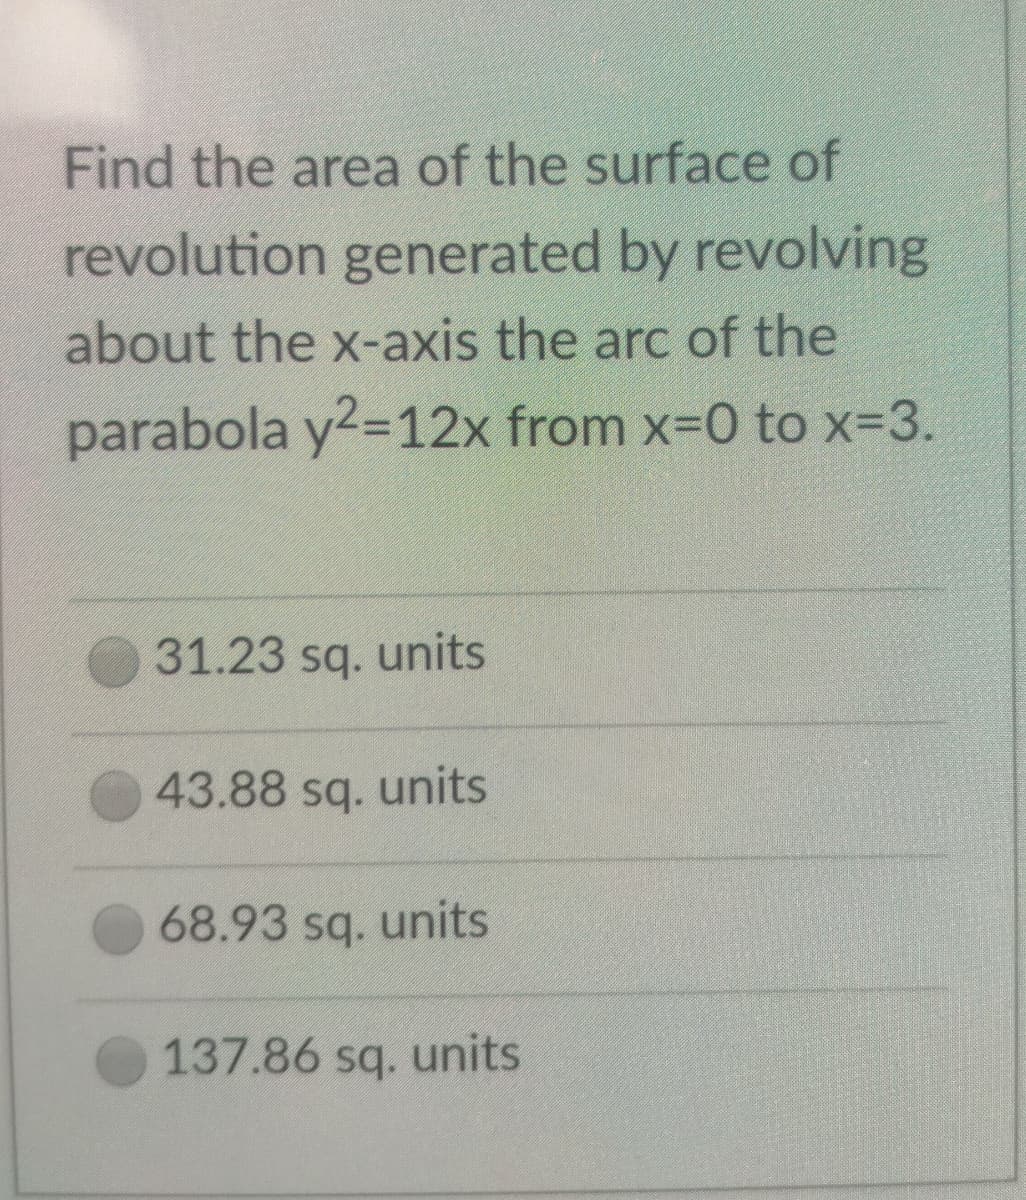 Find the area of the surface of
revolution generated by revolving
about the x-axis the arc of the
parabola y2=12x from x-0 to x-3.
31.23 sq. units
43.88 sq. units
68.93 sq. units
137.86 sq. units
